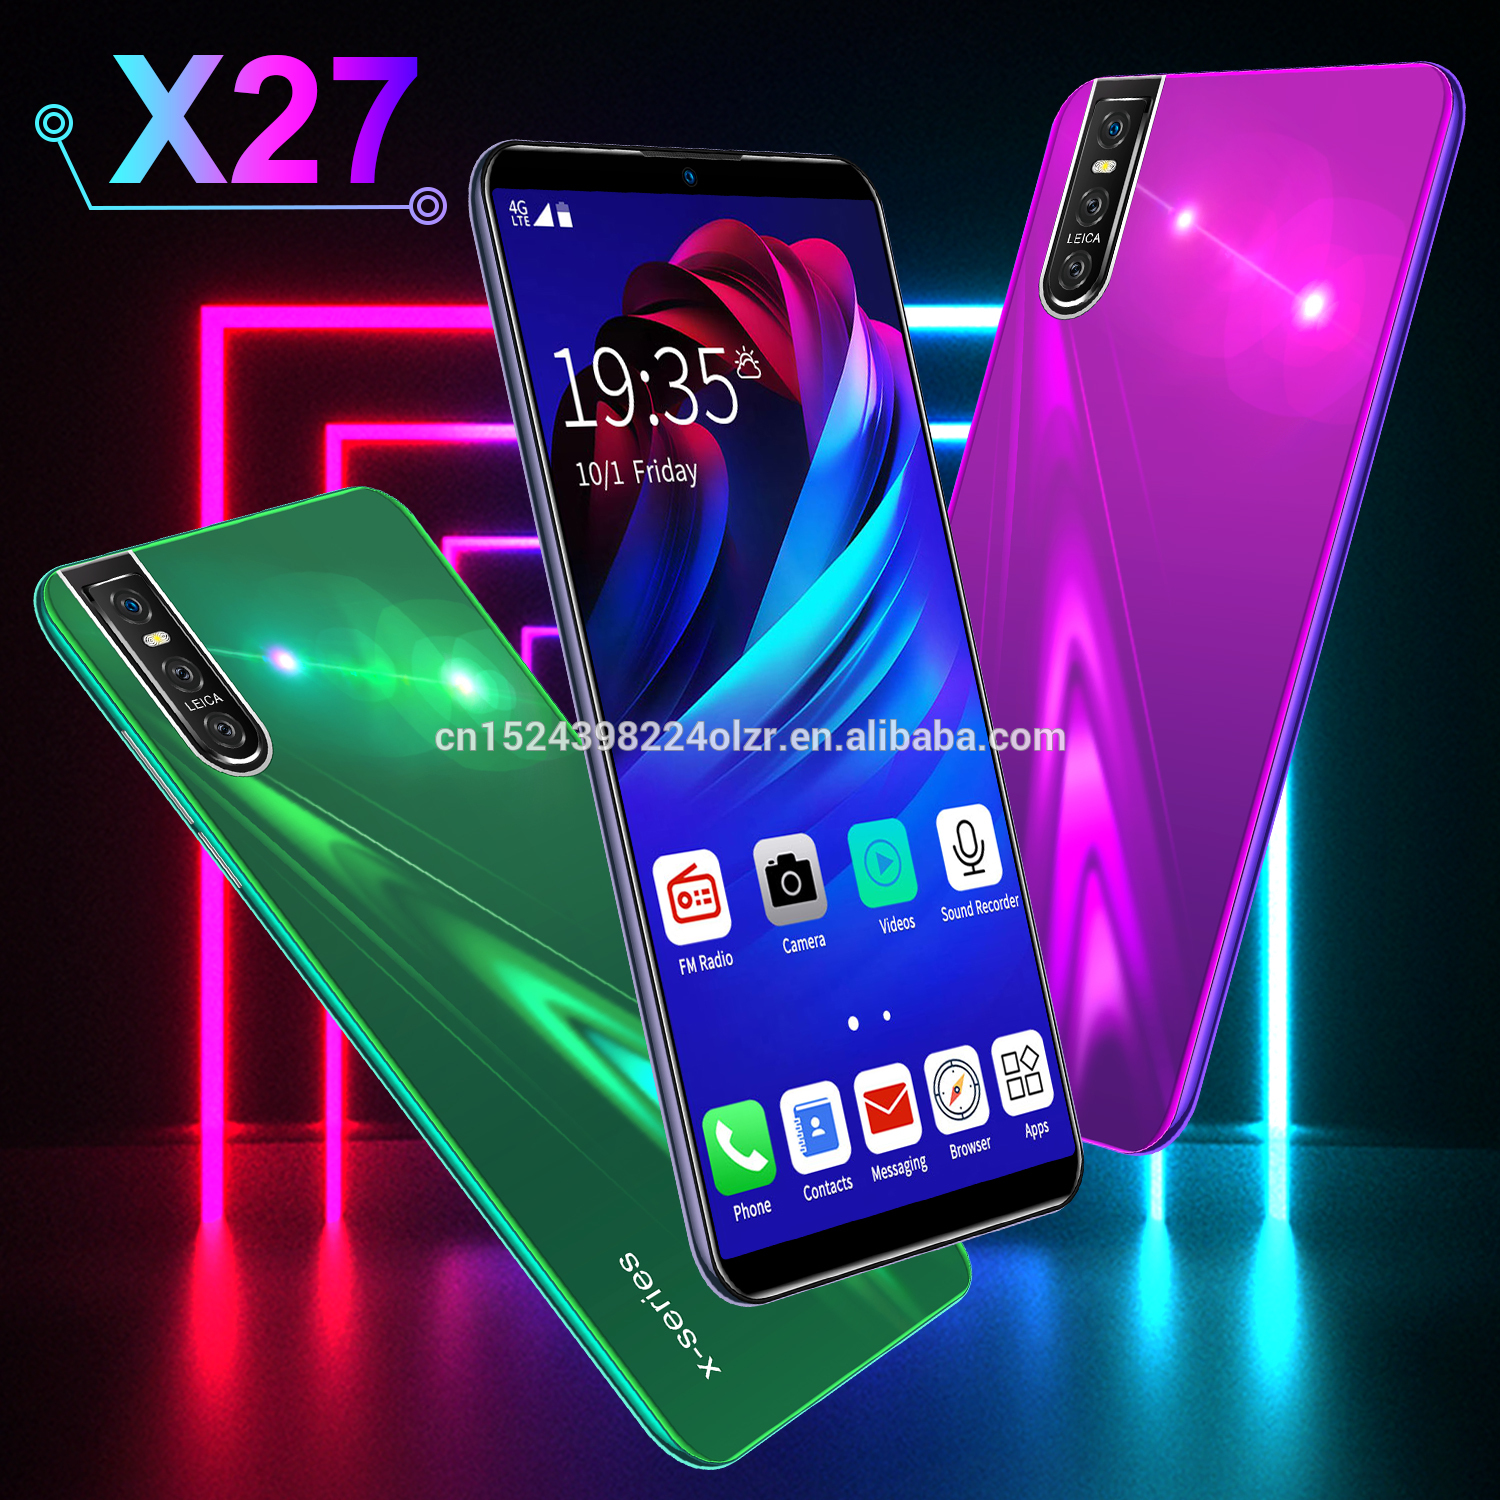 Wholesale X27 Mobile Phone Android 6.1" 2+16GB  Full Screen Dual Sim Unlocked Smart Phones fast shipping